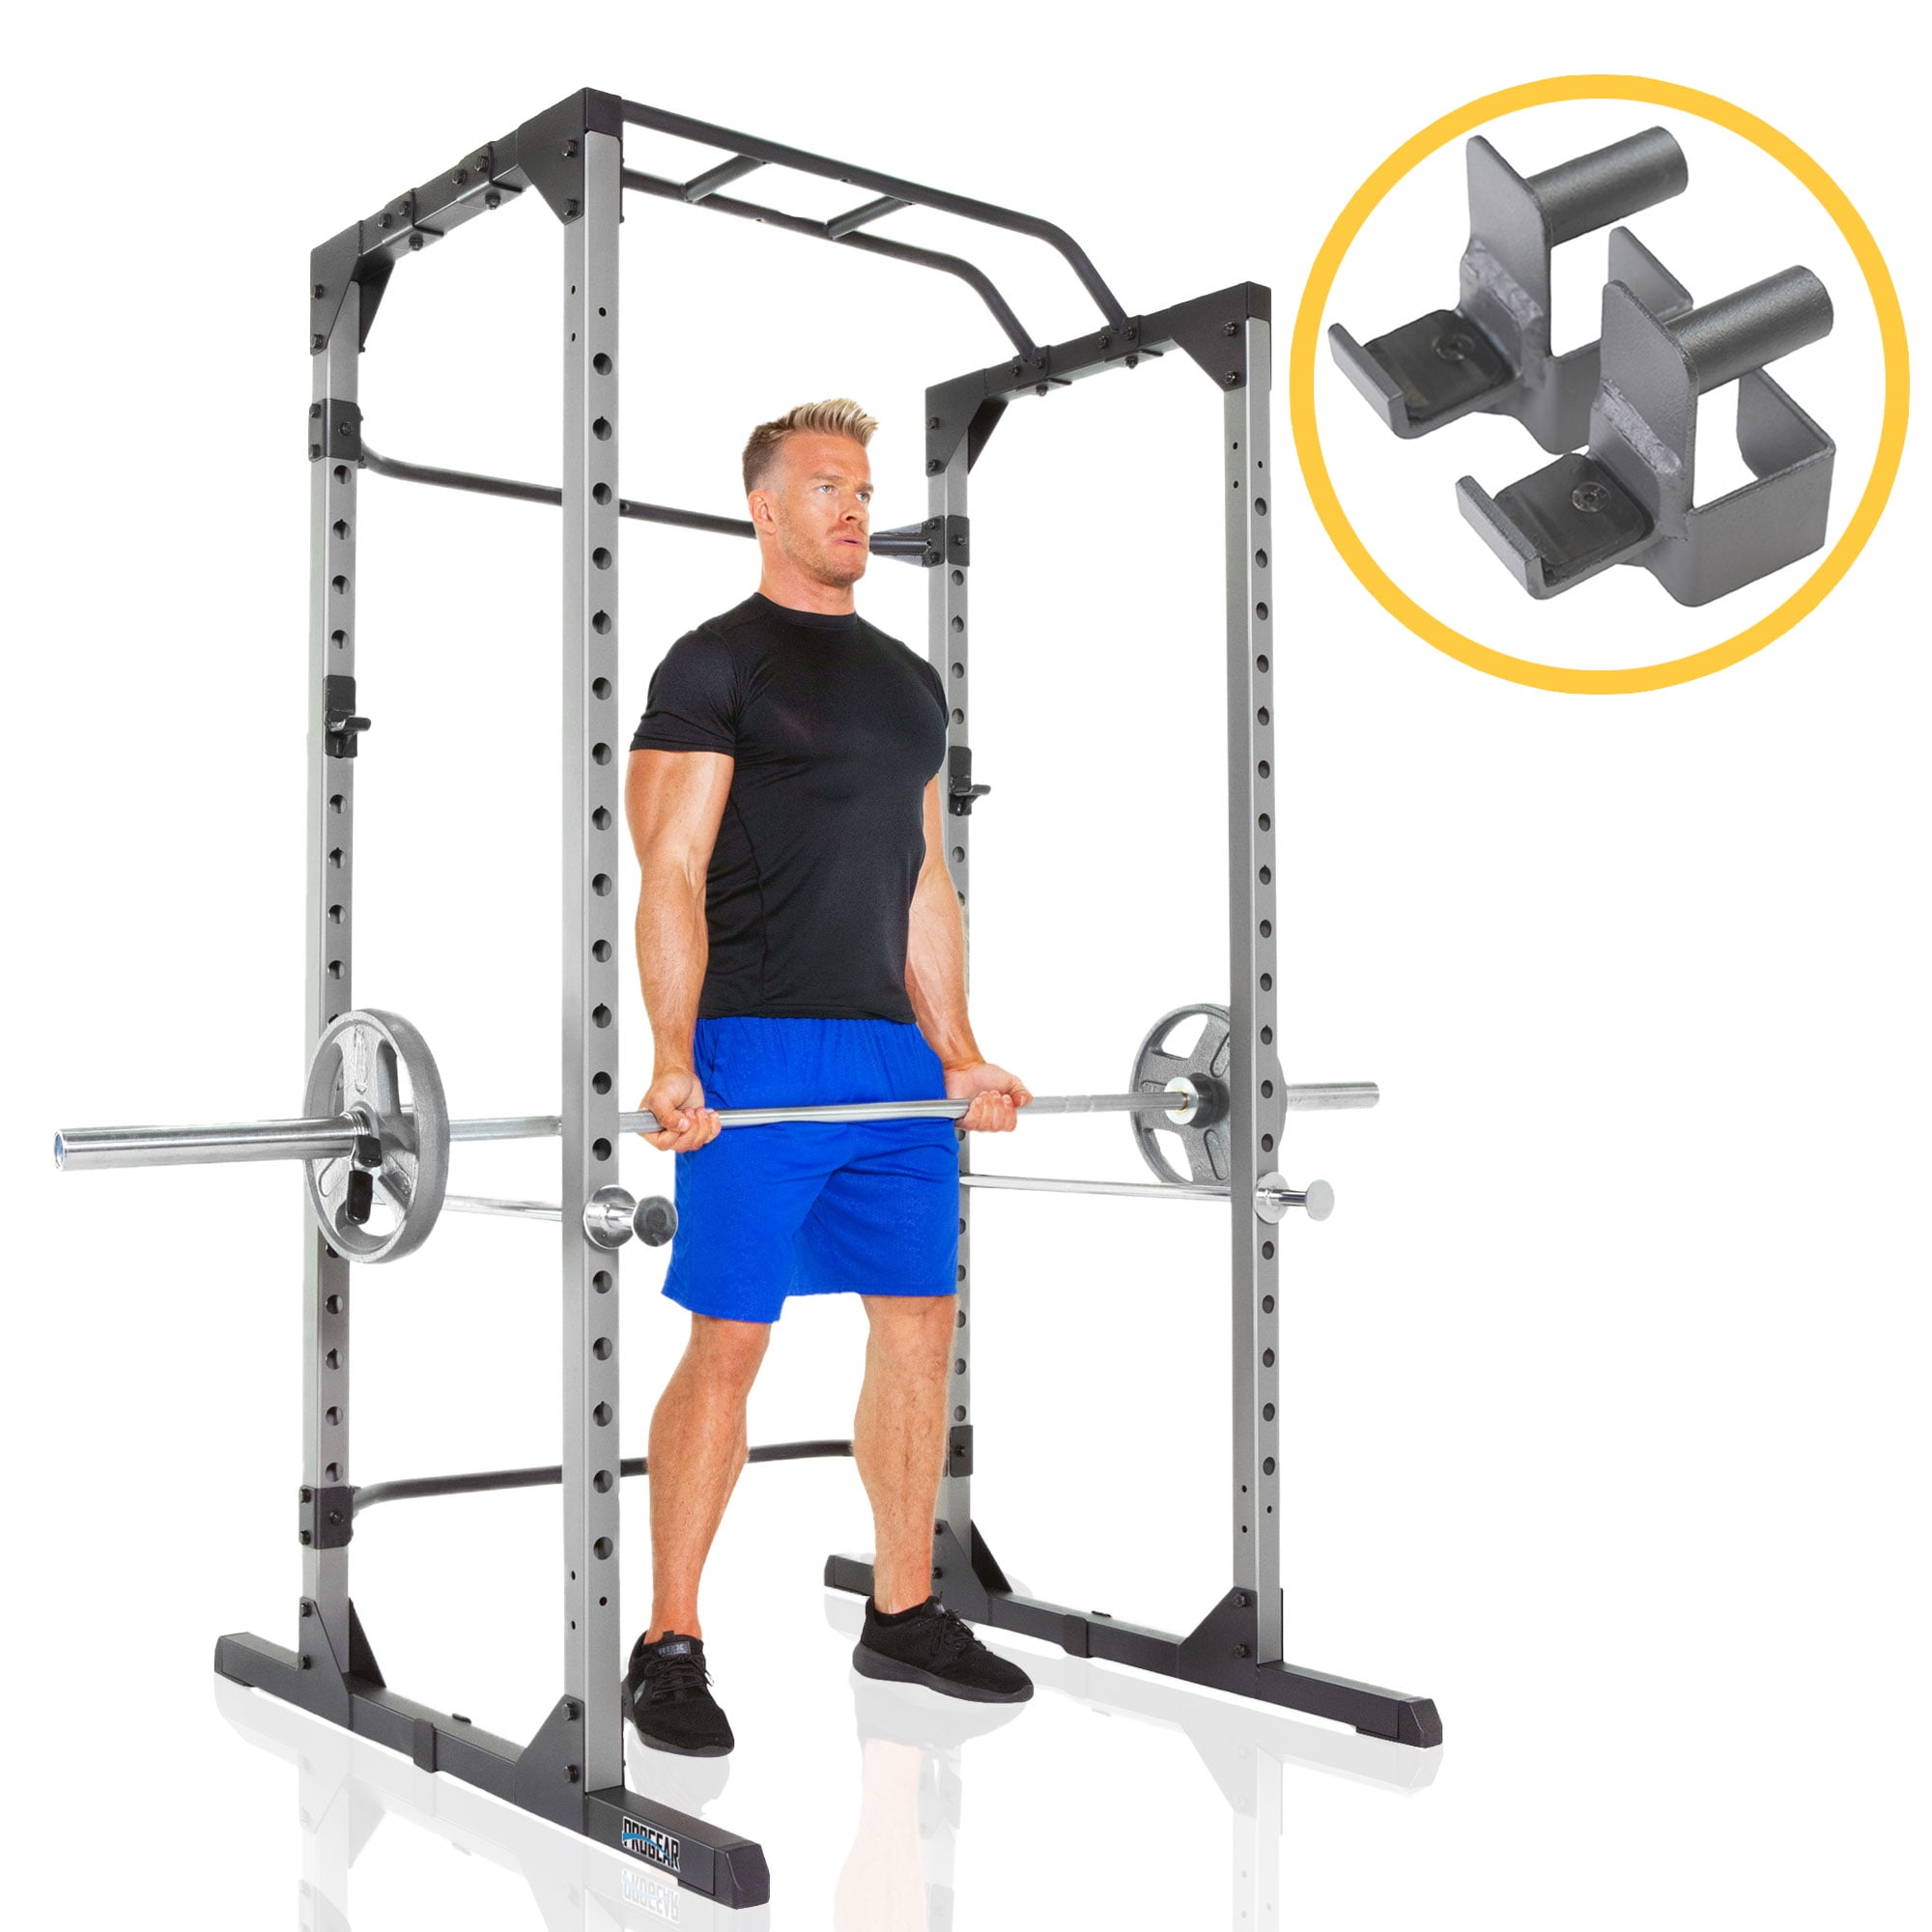 Squat Rack Power Cage with J-Hooks, Ultra Strength 800lb Weight Capacity, Optional Lat Attachment - Walmart.com